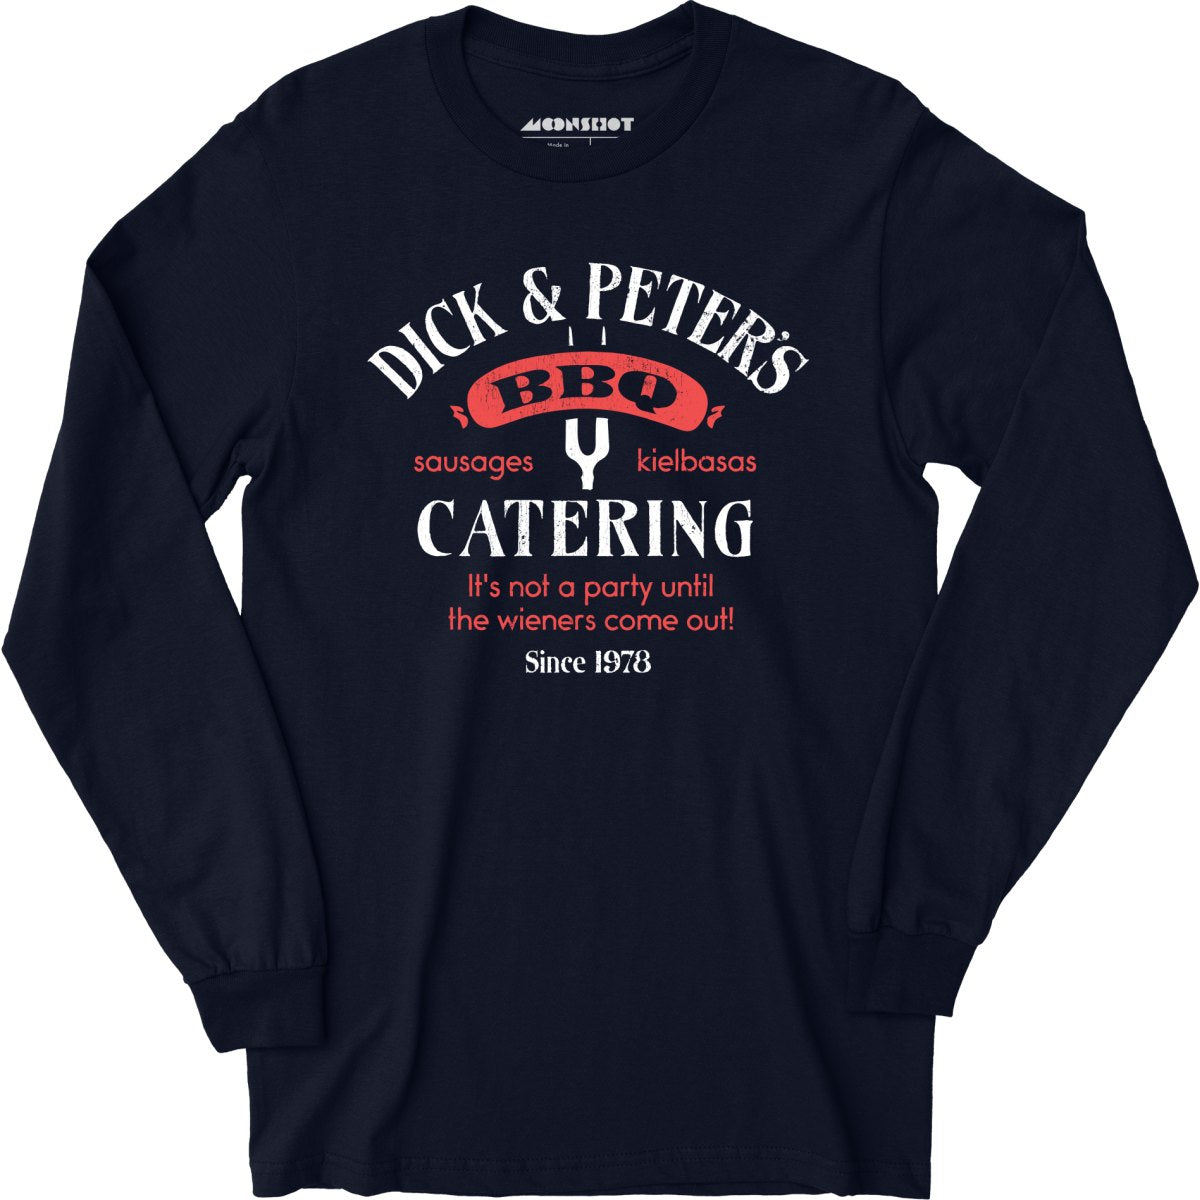 Dick & Peter's BBQ Catering - Long Sleeve T-Shirt